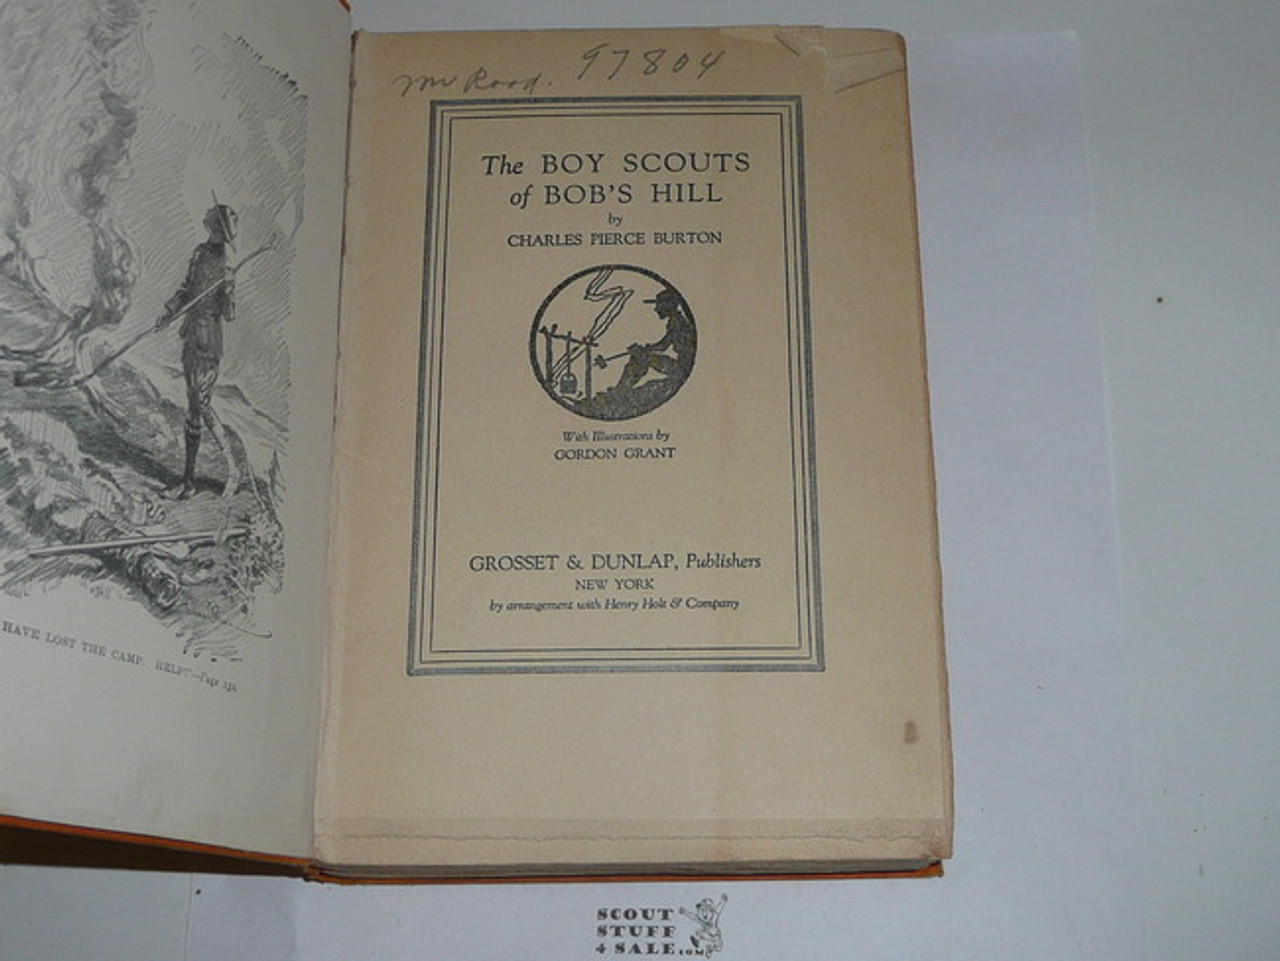 The Boy Scouts of Bob's Hill, By Charles Pierce Burton, 1913, Every Boy's Library Edition, Type Three Binding